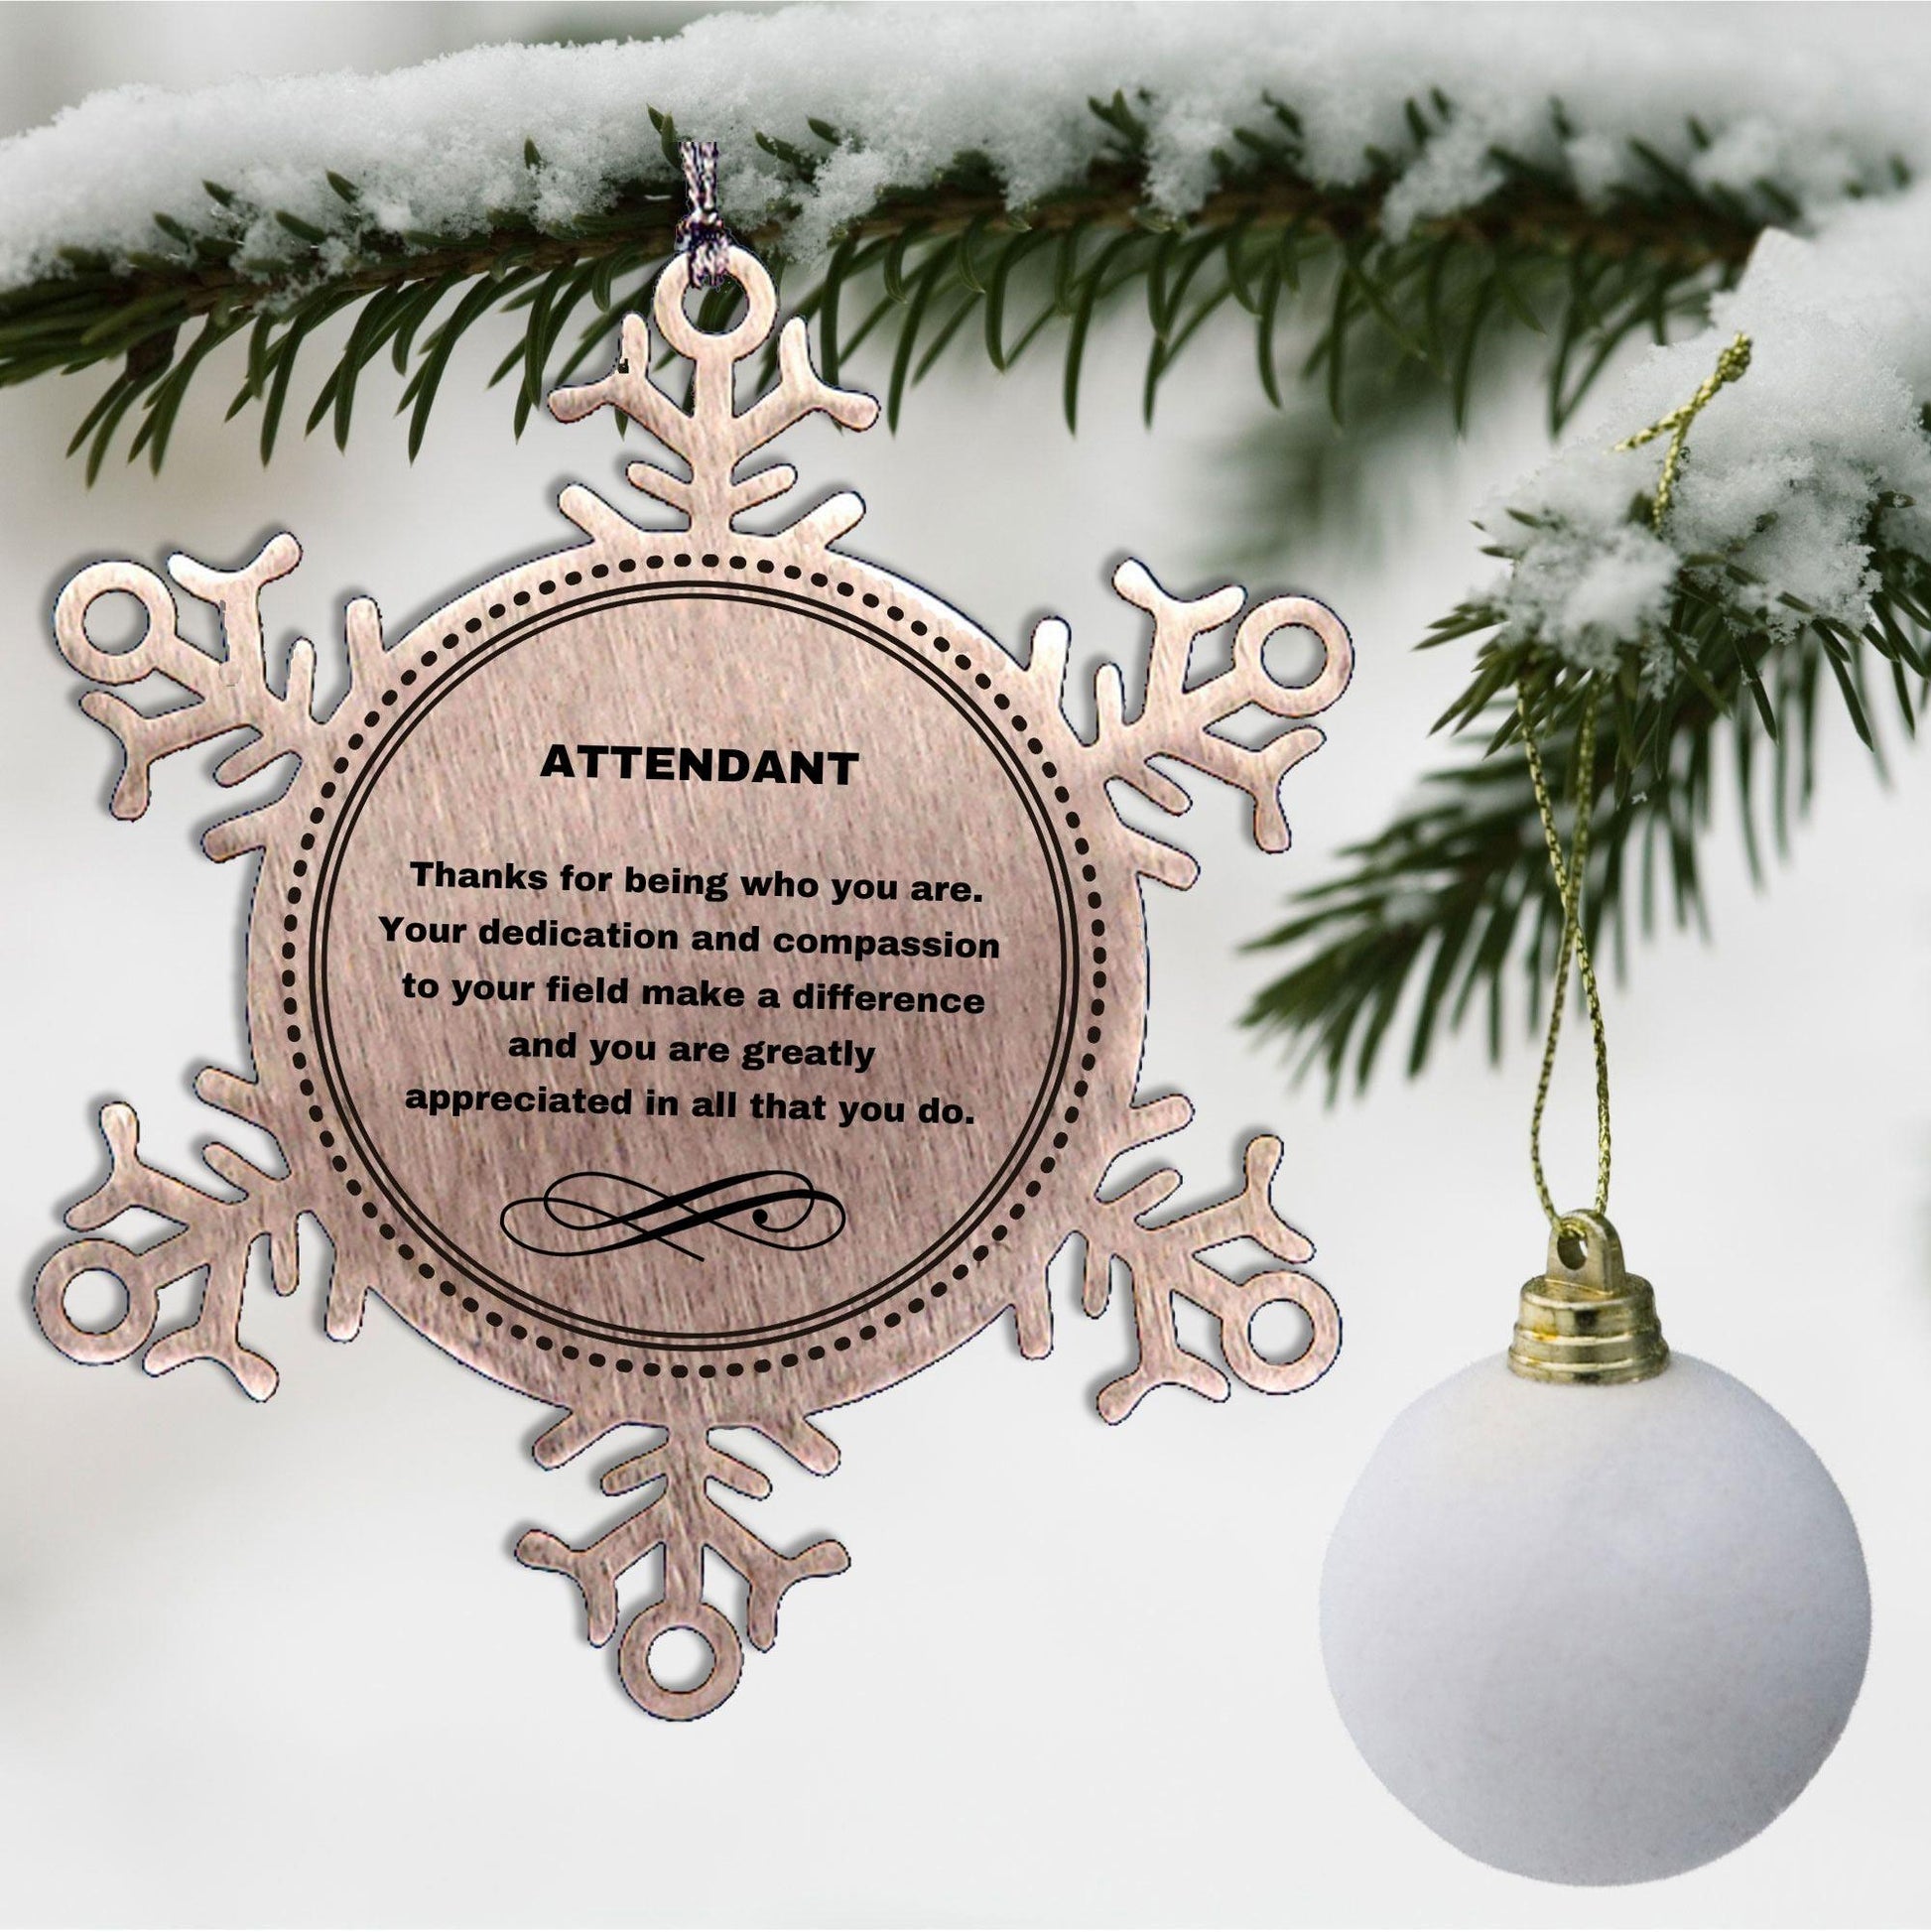 Attendant Snowflake Ornament - Thanks for being who you are - Birthday Christmas Tree Gifts Coworkers Colleague Boss - Mallard Moon Gift Shop